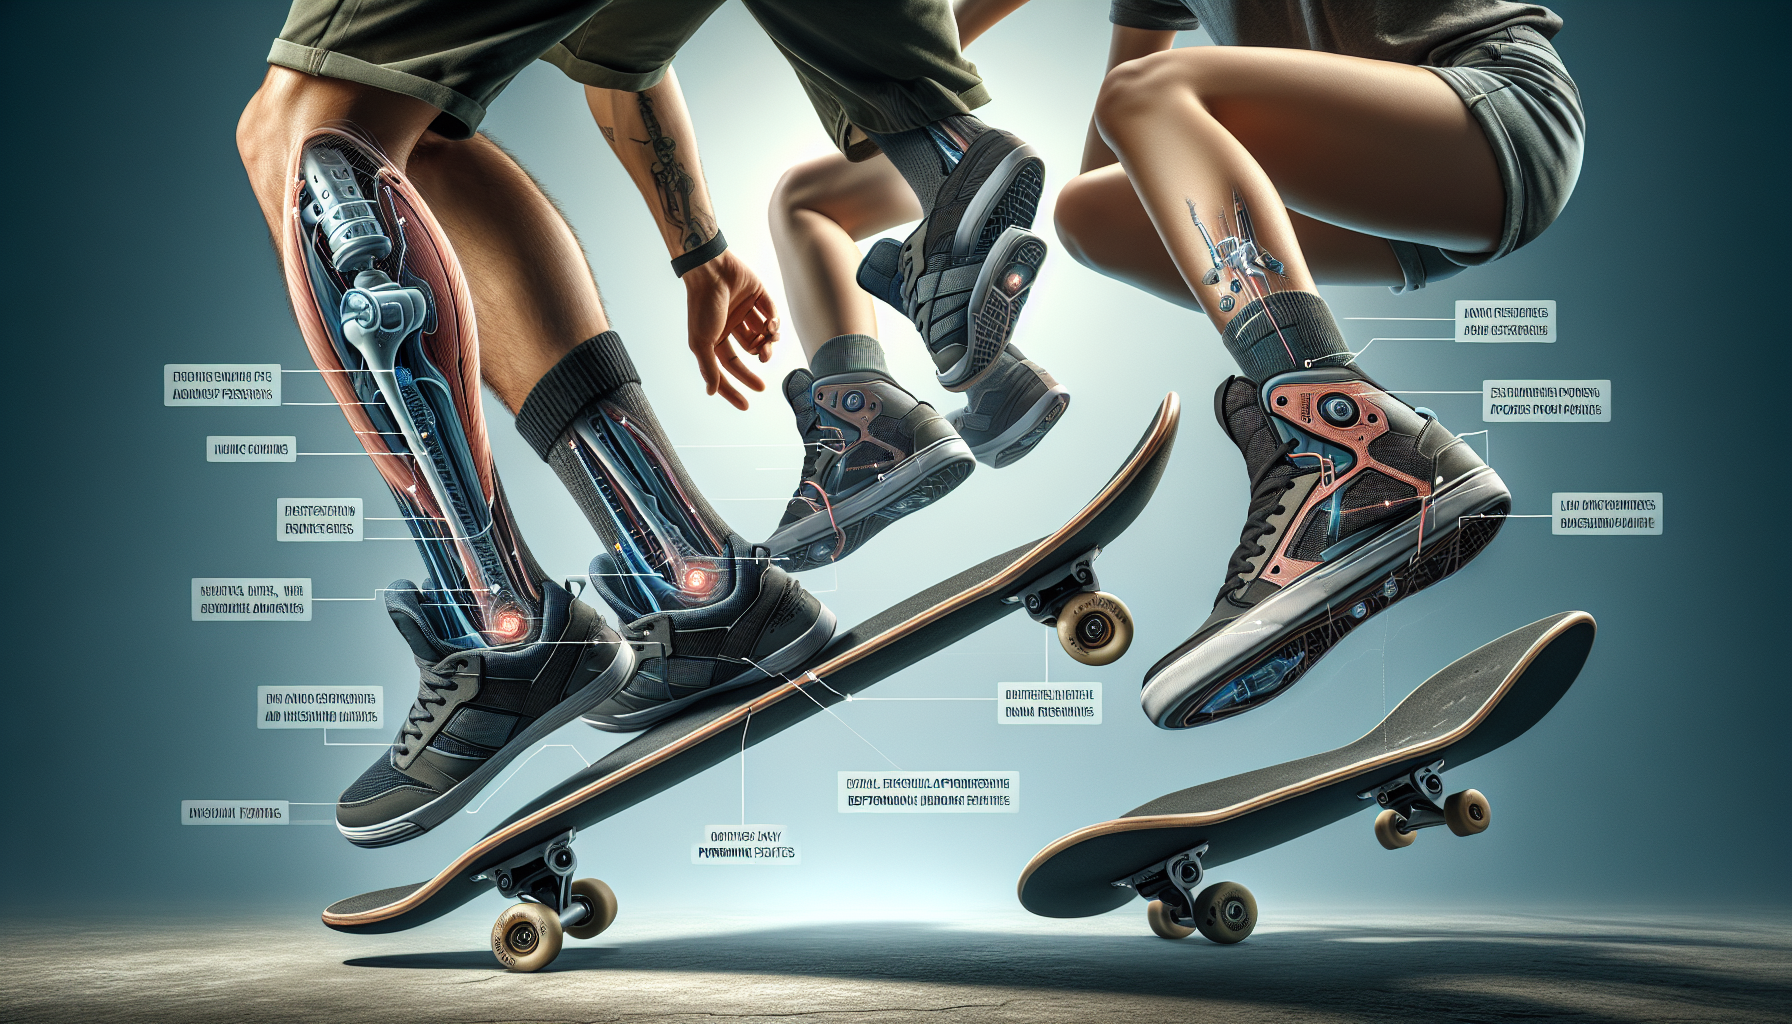 Can You Discuss The Role Of Skate Shoes In Preventing Injuries And Discomfort?